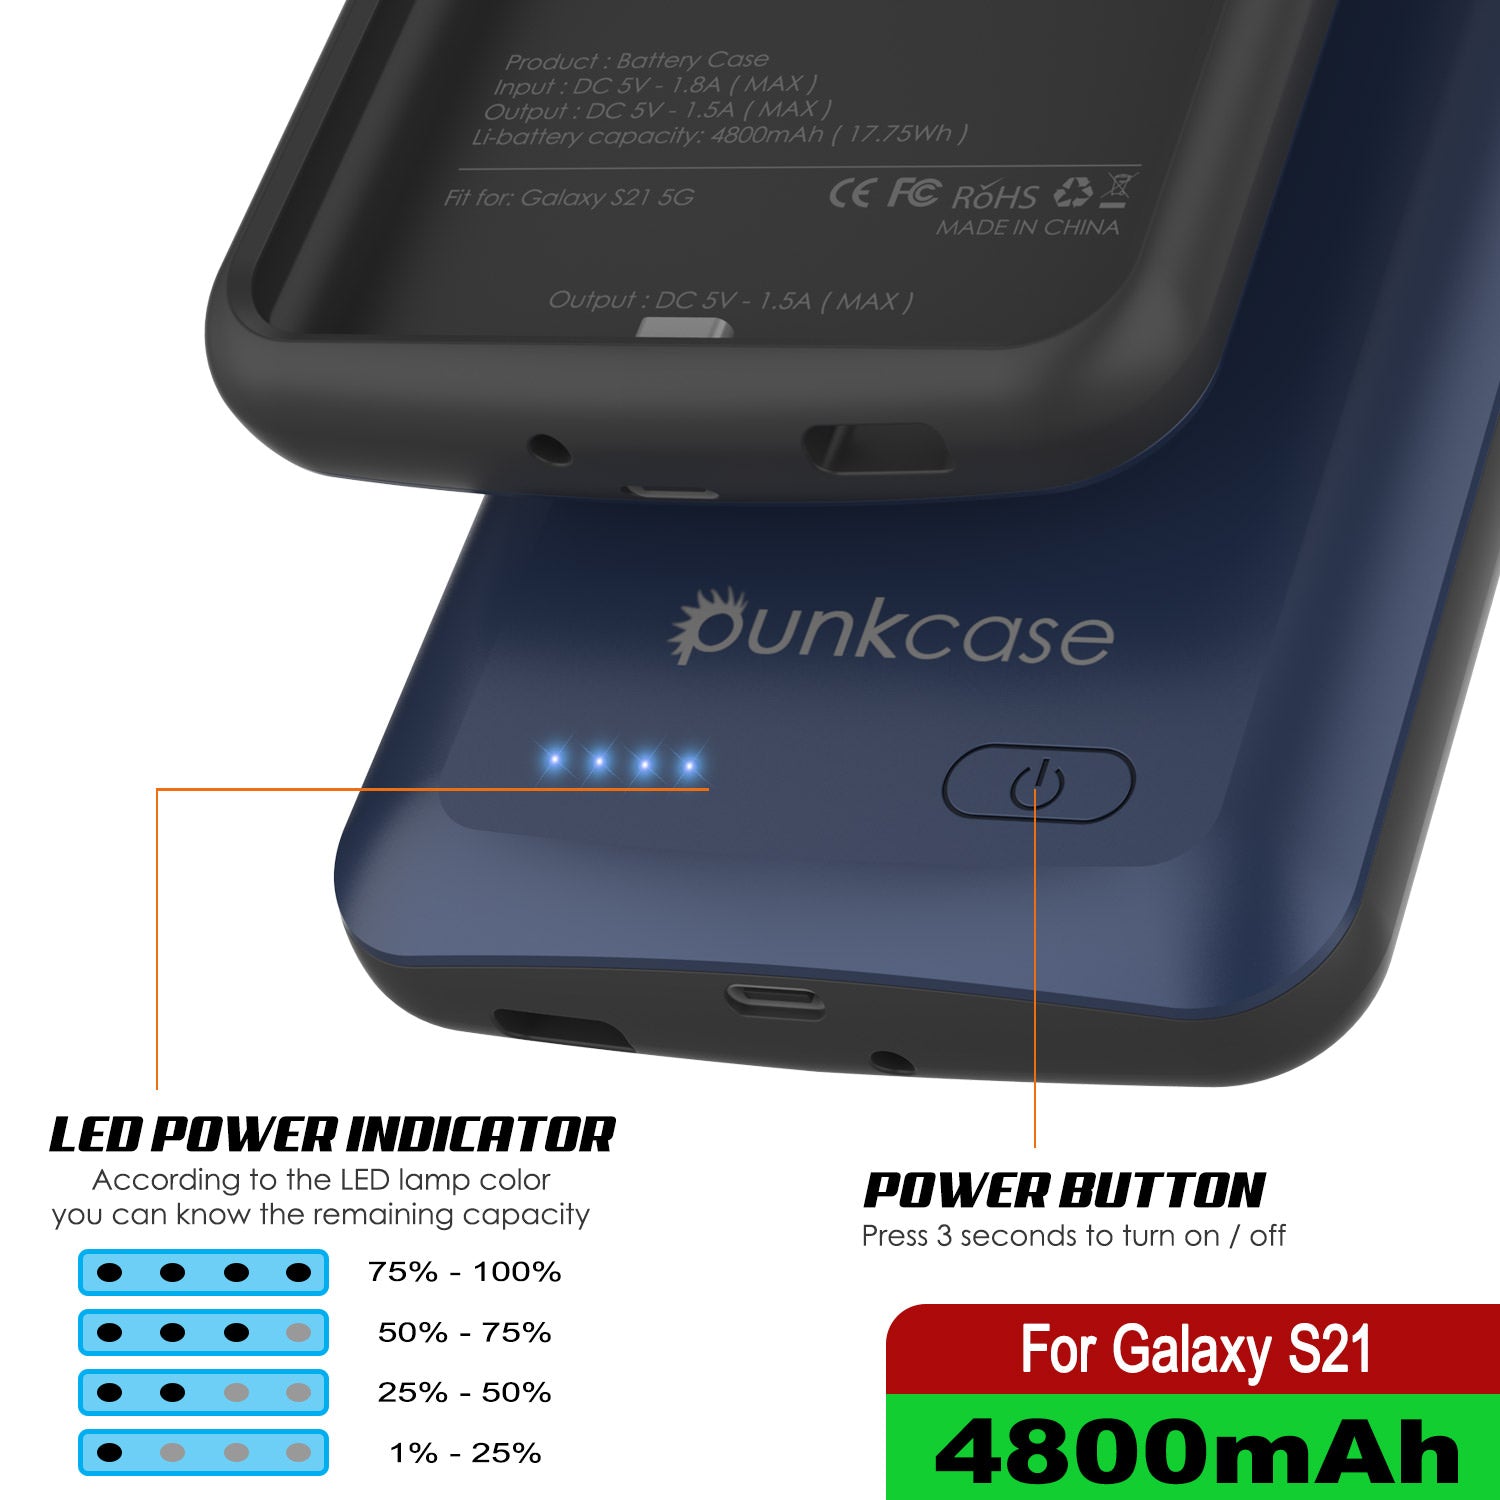 PunkJuice S21 Battery Case Blue - Portable Charging Power Juice Bank with 4800mAh